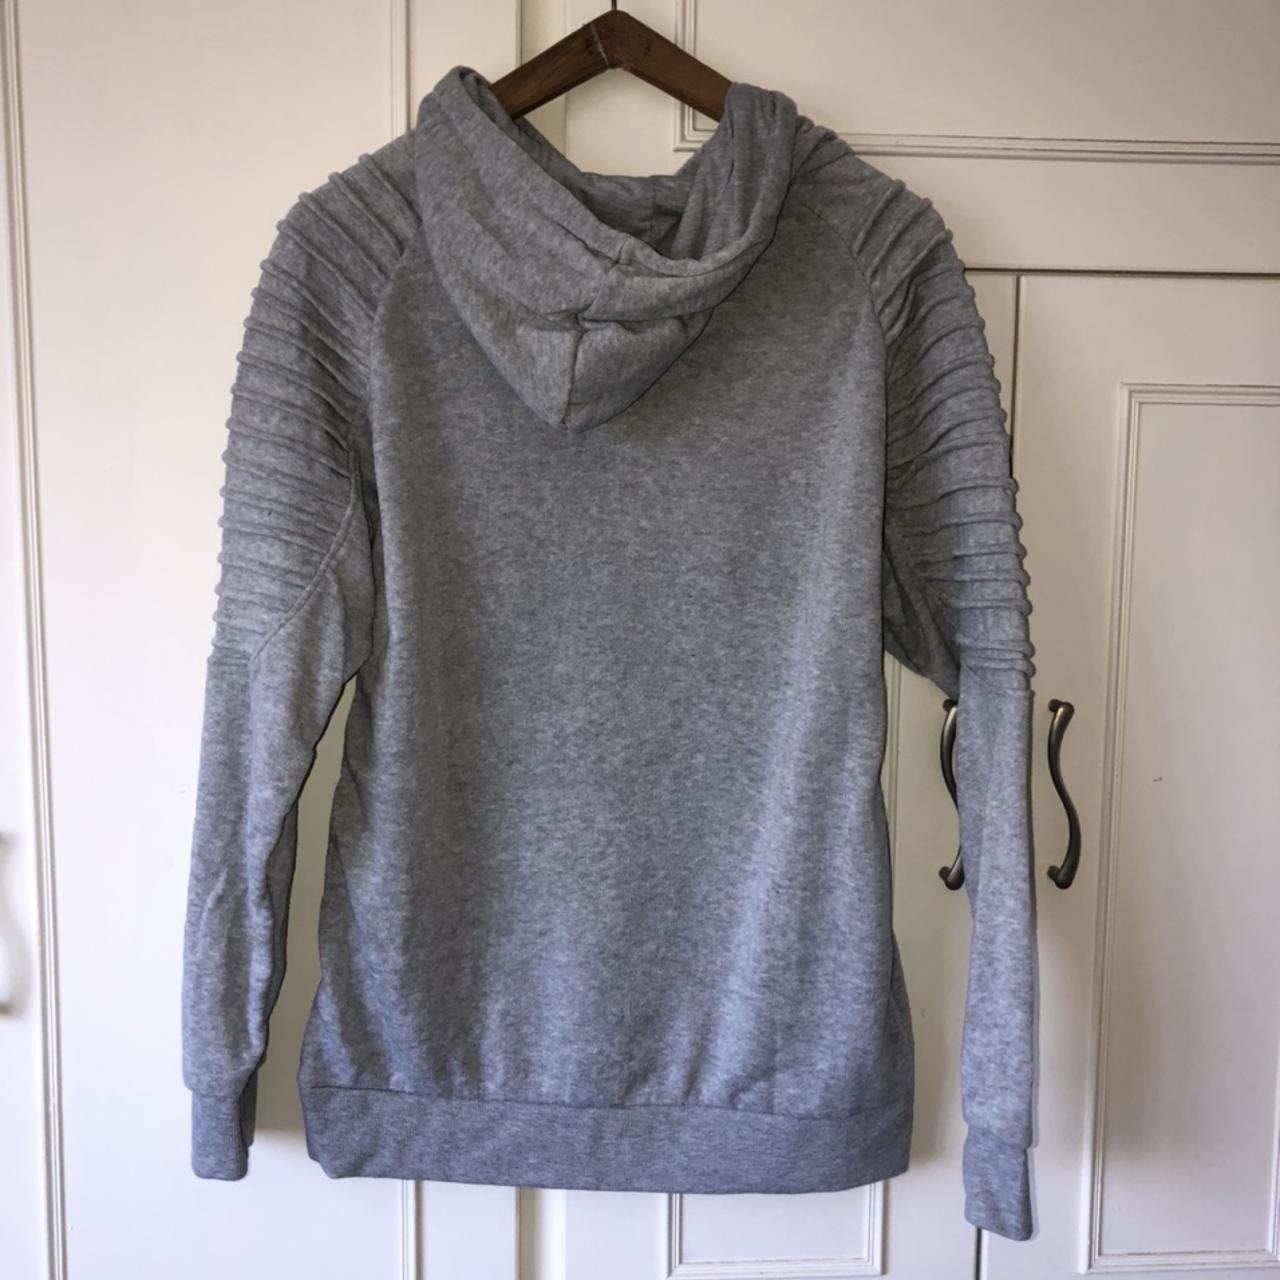 Siimhwrss / Men’s Grey Hoodie / Size L New without... - Depop